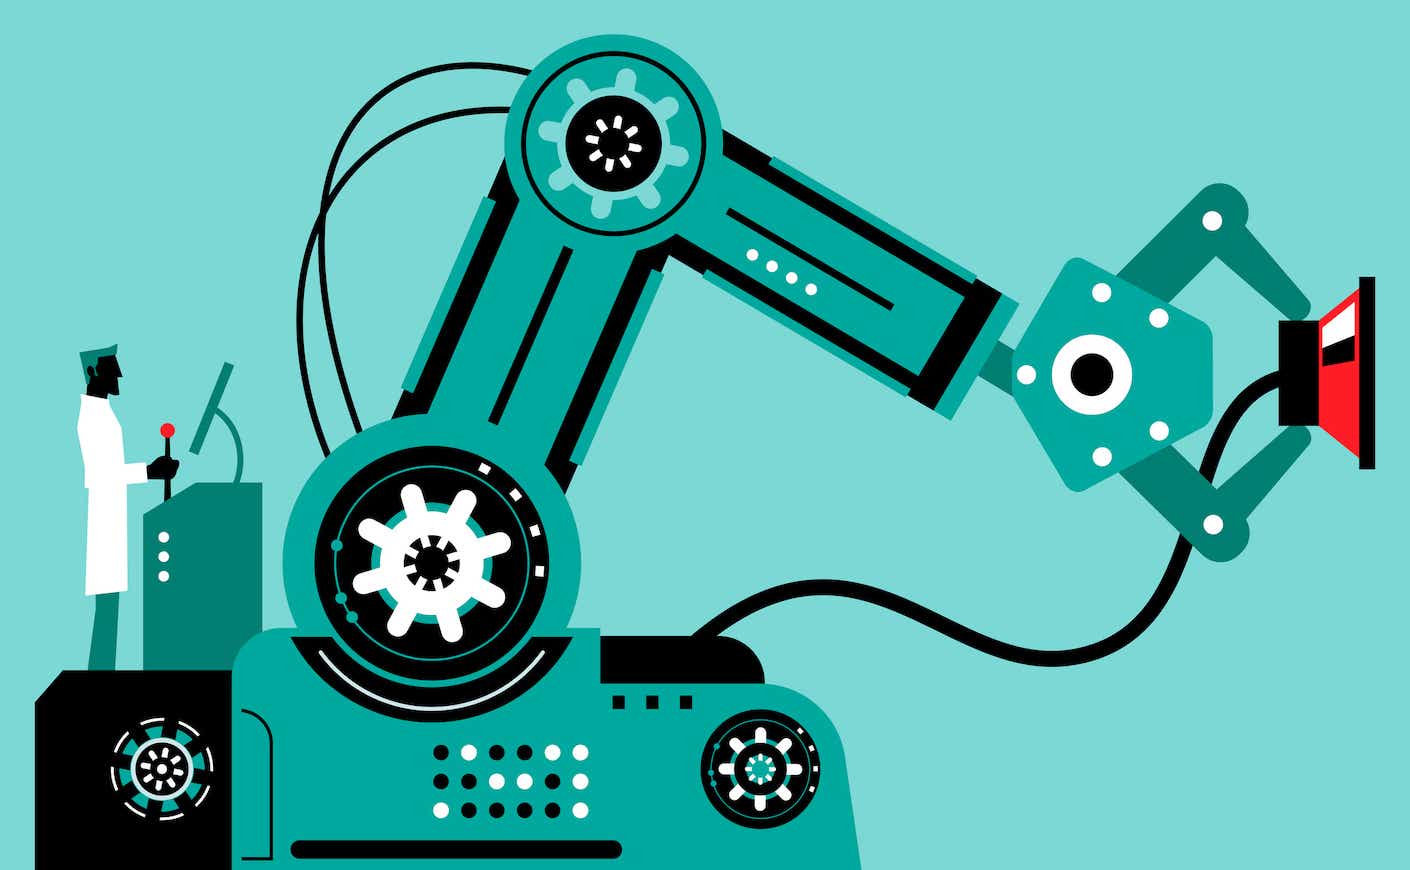 AI Robot Characters Vector art illustration. Doctor (Engineer) uses joystick to operate robotic arm to use a stethoscope to listen.